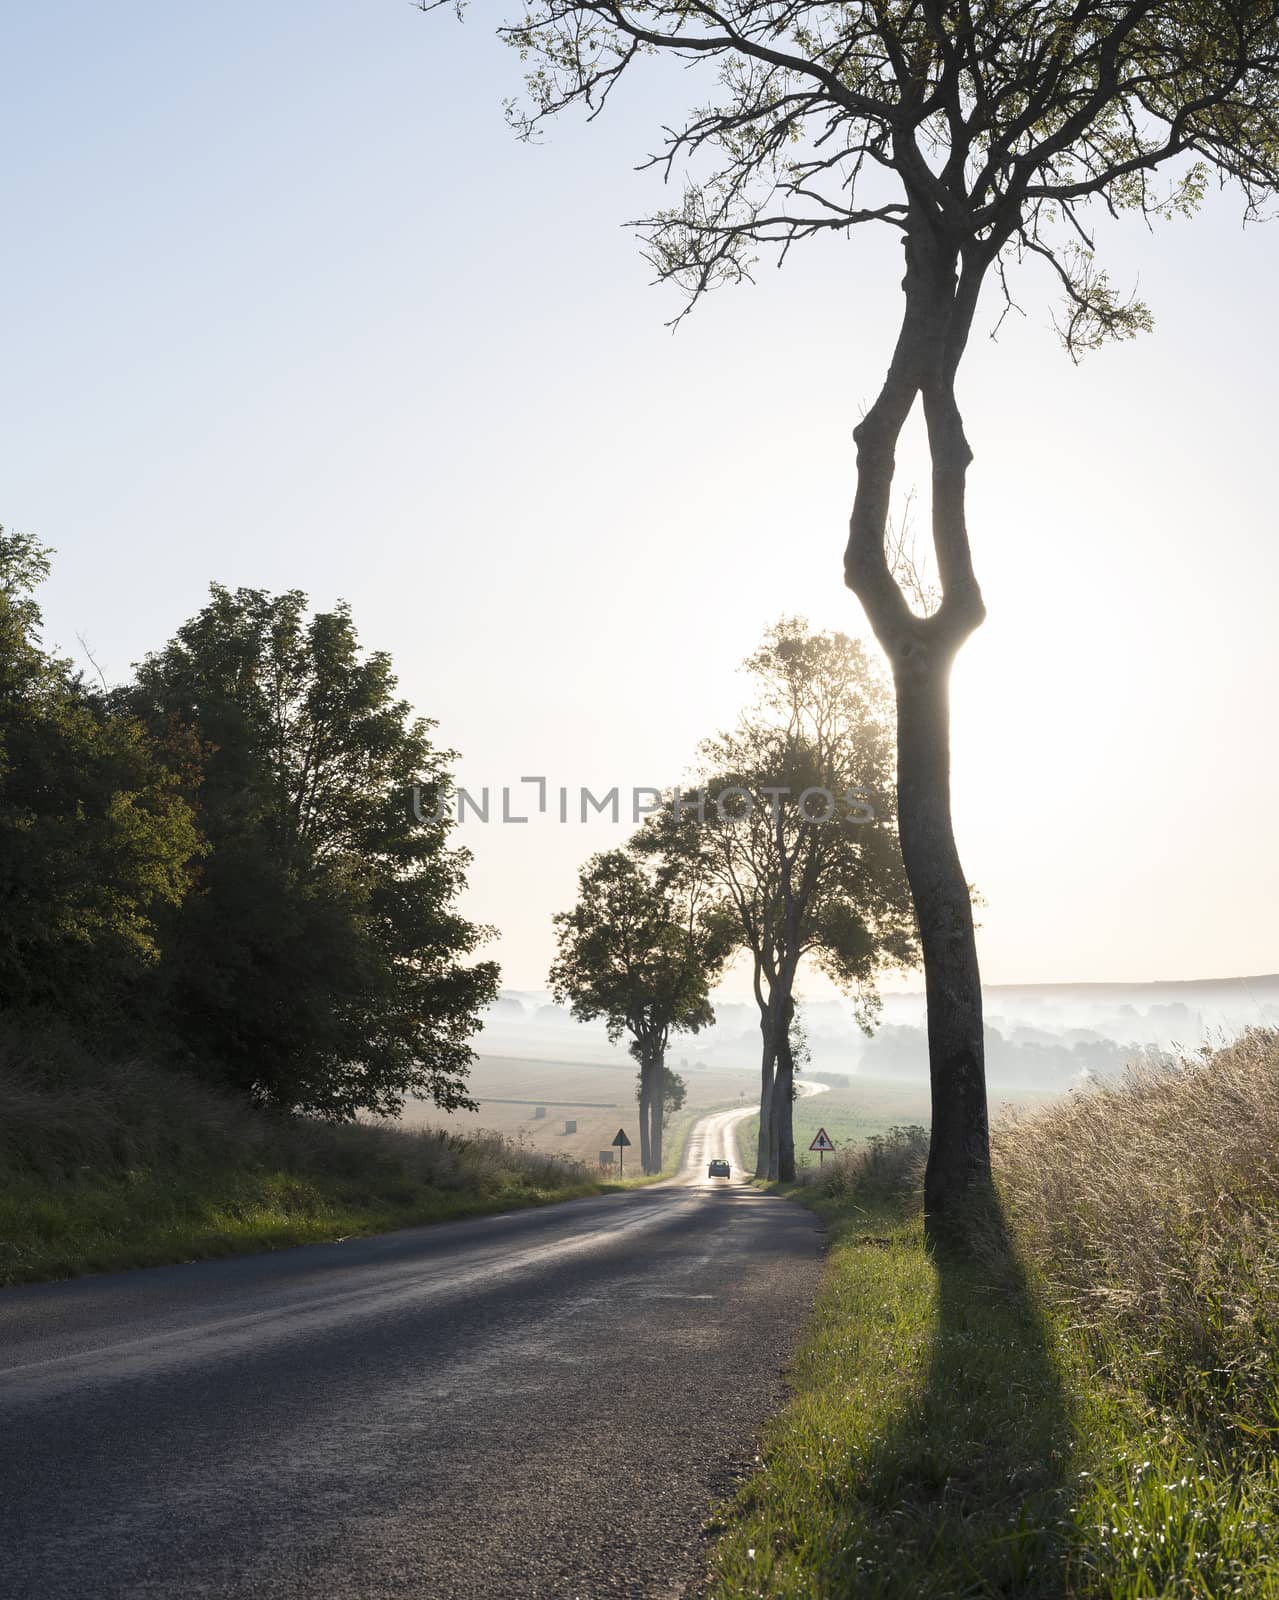 early morning country road in french picardie near boulogne and calais by ahavelaar